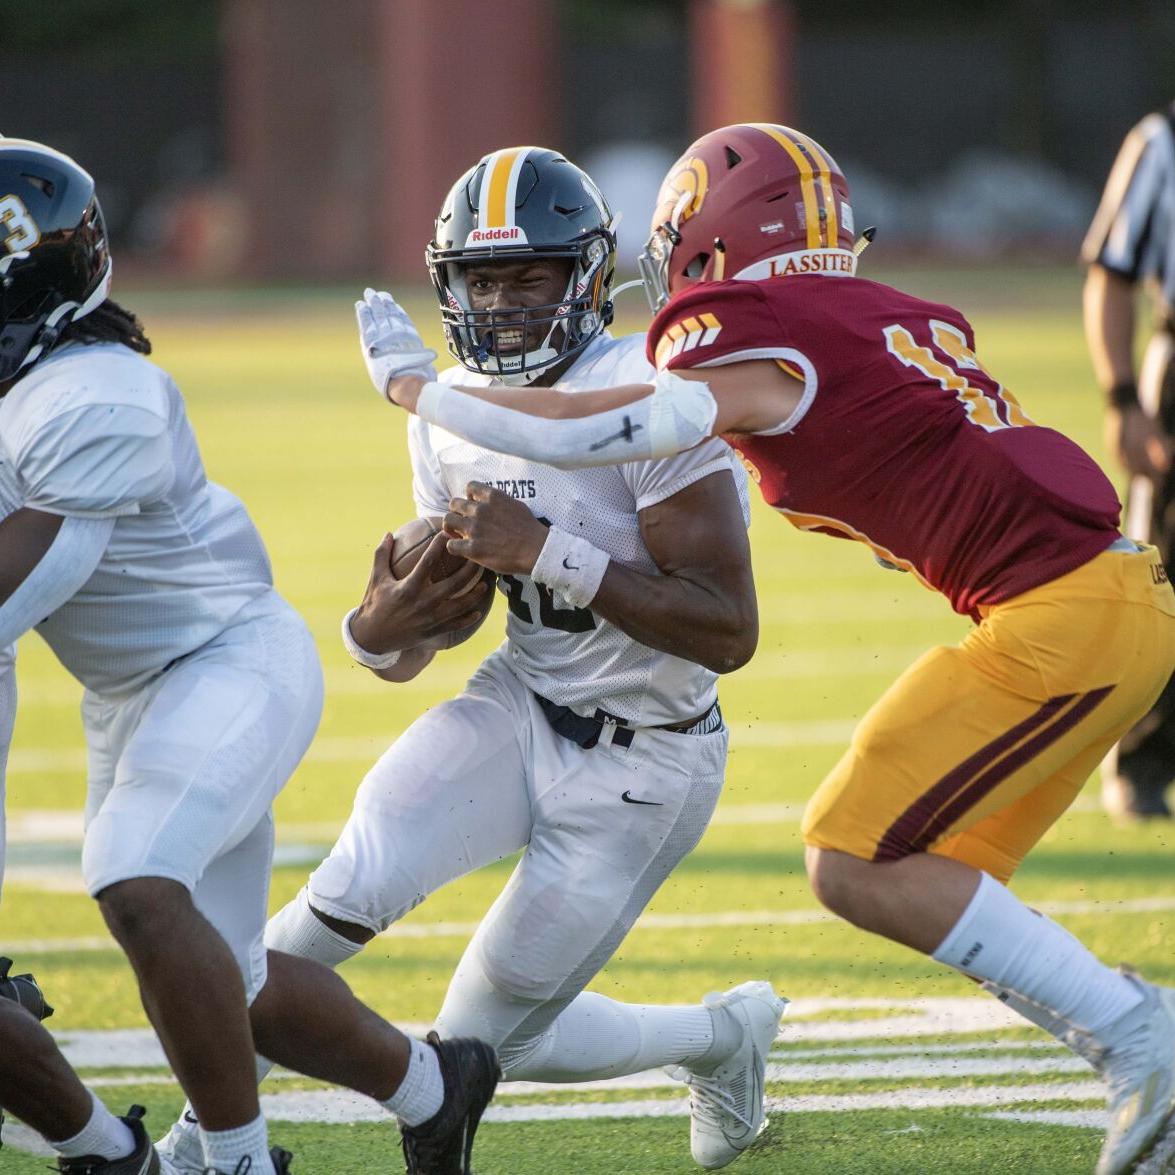 Lassiter looks to win second straight, Cobb Football Friday